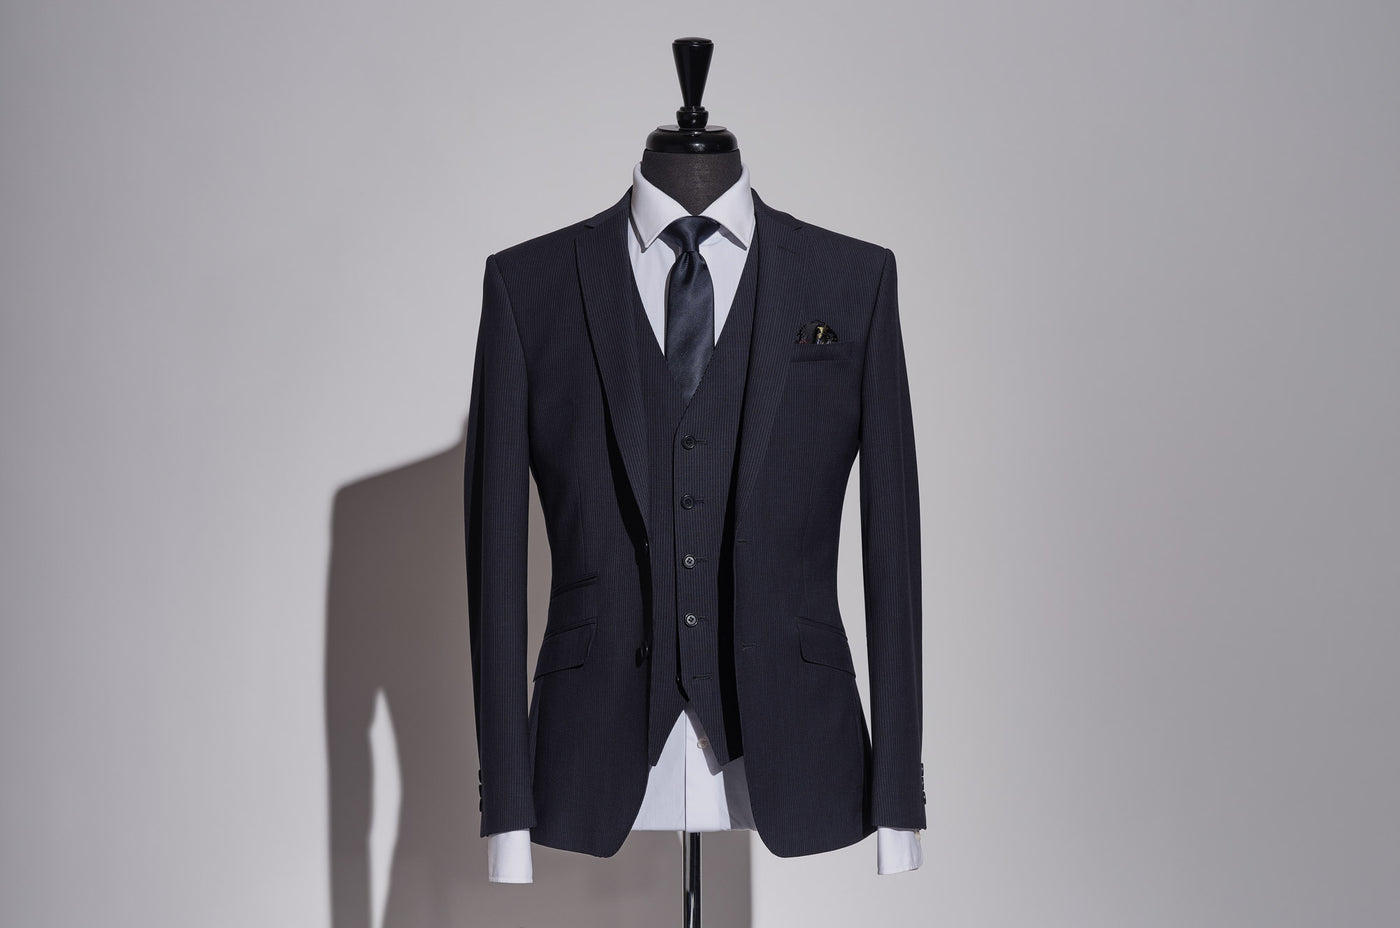 Introducing the second suit collection from Tom Percy. Featuring four British tailored men's three-piece suits.Each suit has a beautifully discreet crimson detail which can be seen on the underside of the collar hinting at the suit’s exquisite exclusivity